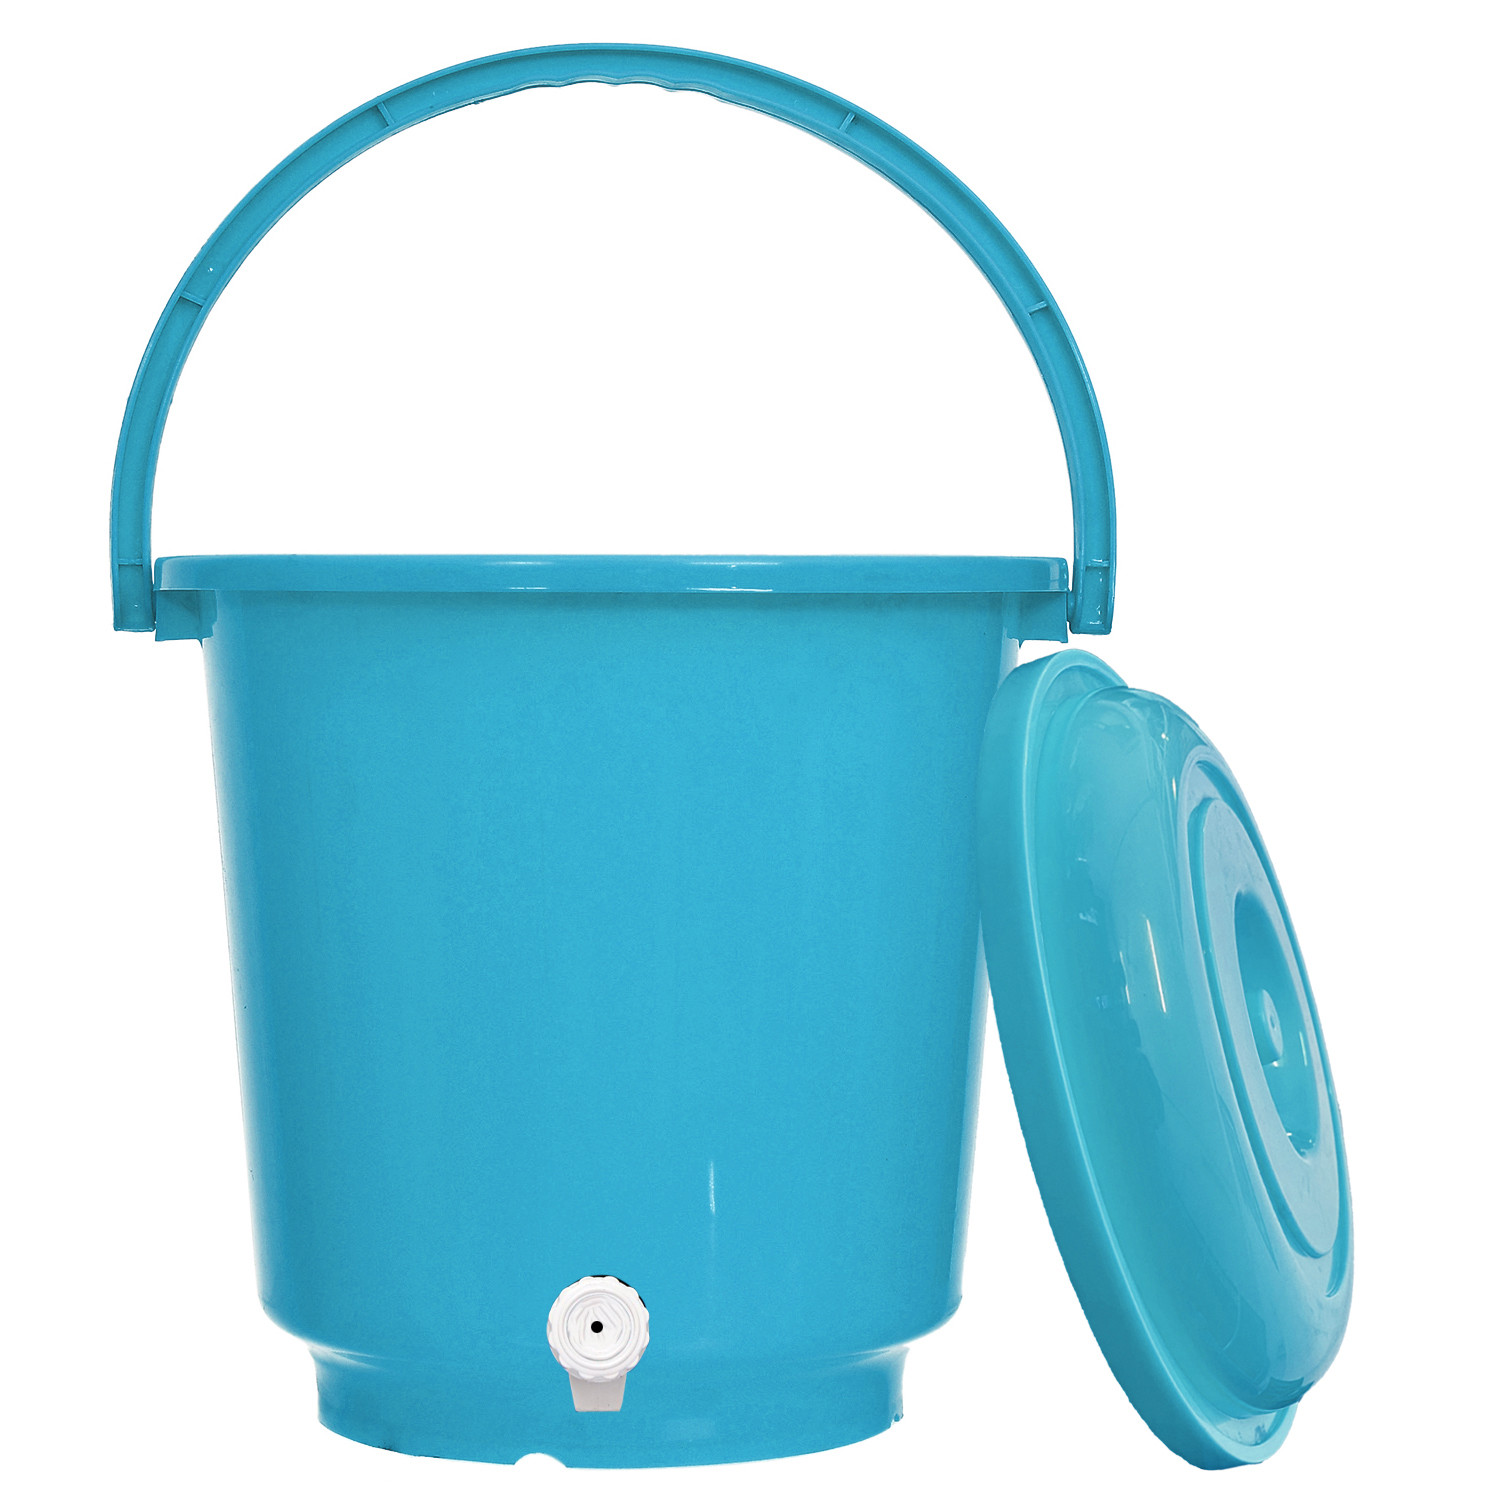 Kuber Industries Multipurposes Plastic Bucket With Lid & Tap System For Home Cleaning & Save Water, 18Ltr. (Blue)